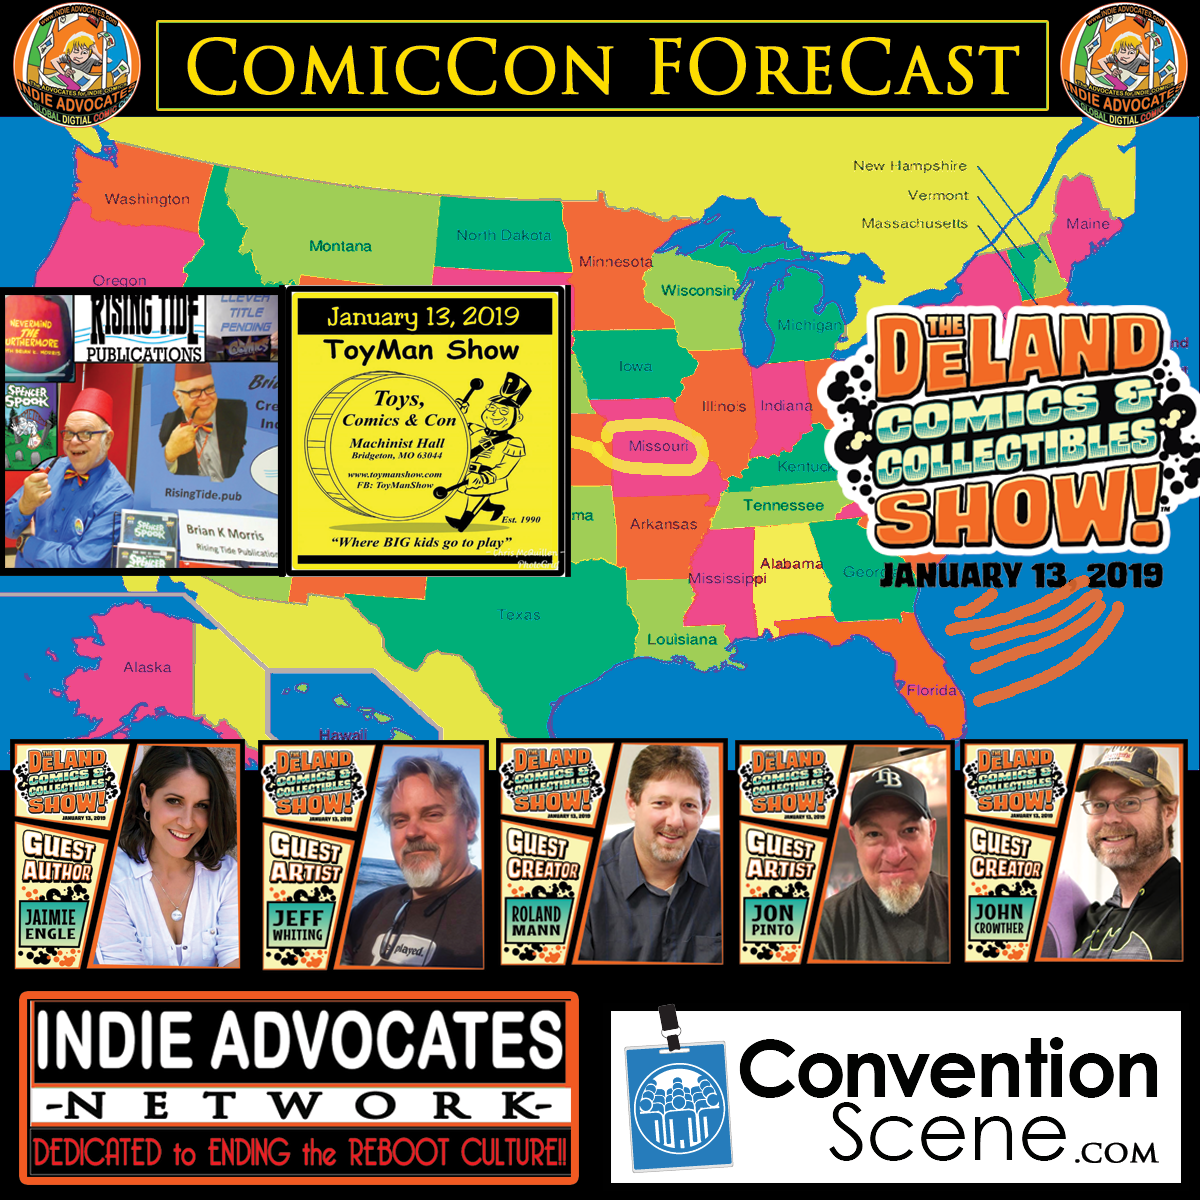 THE COMIC CON   FORECAST:: Jan 10th-13th:: (MO) The Toy Man Show- FEATURING- BRIAN K MORRIS  (1-13) +/+ (FL)The DeLand Collectibles Show (1-13) FEATURING:: John Crowther Jaimie Engle, Roland Mann, Jon Pinto & Jeff Whiting